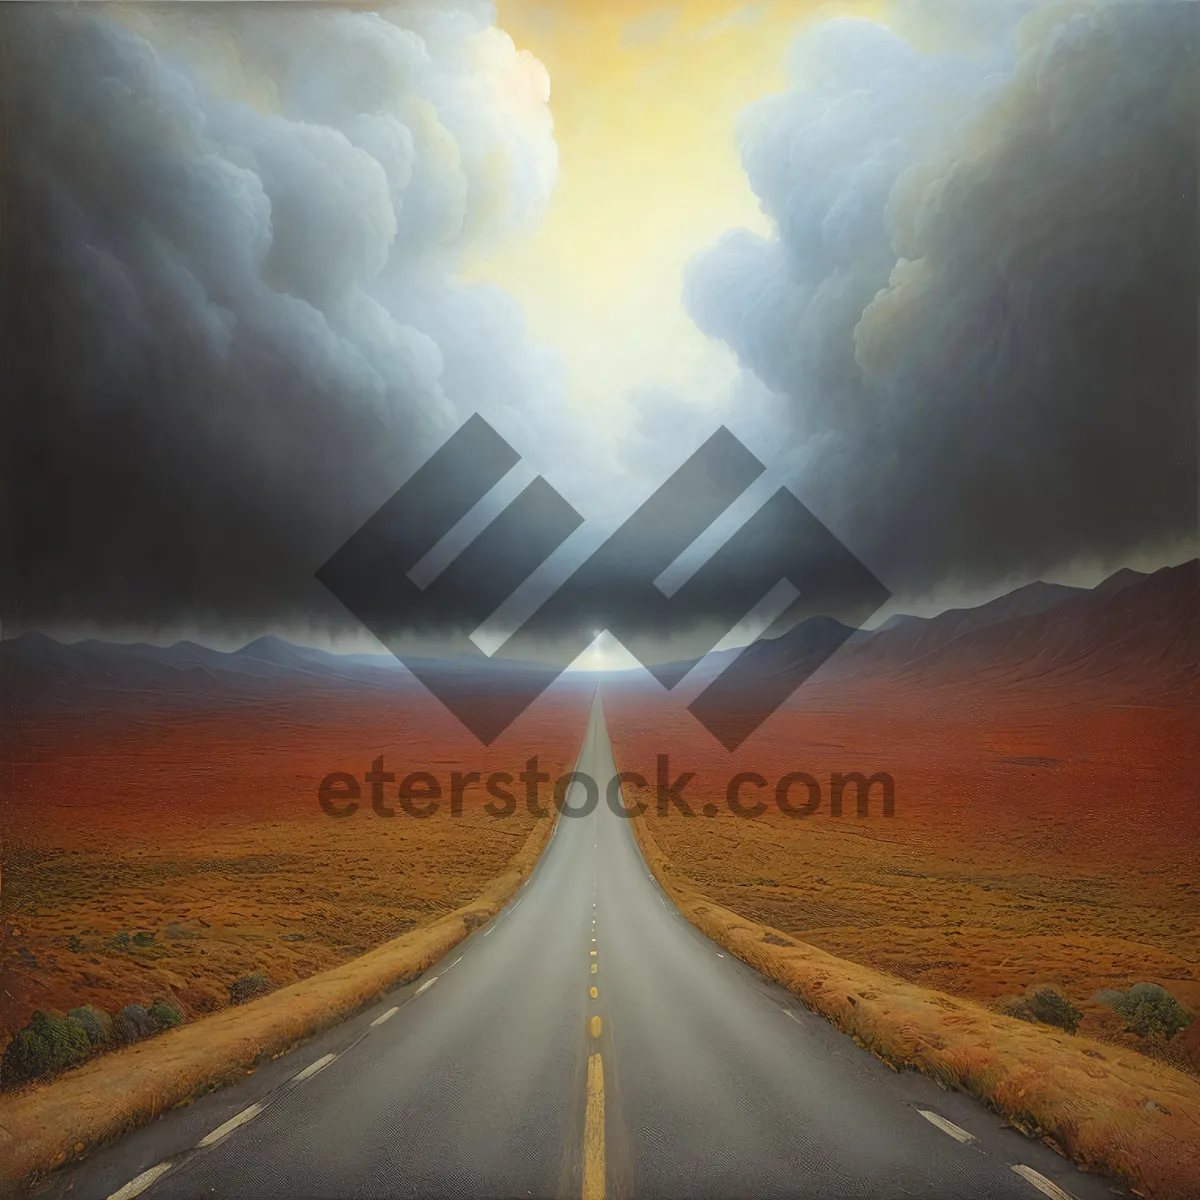 Picture of Endless Horizon: A Road Through Scenic Landscape